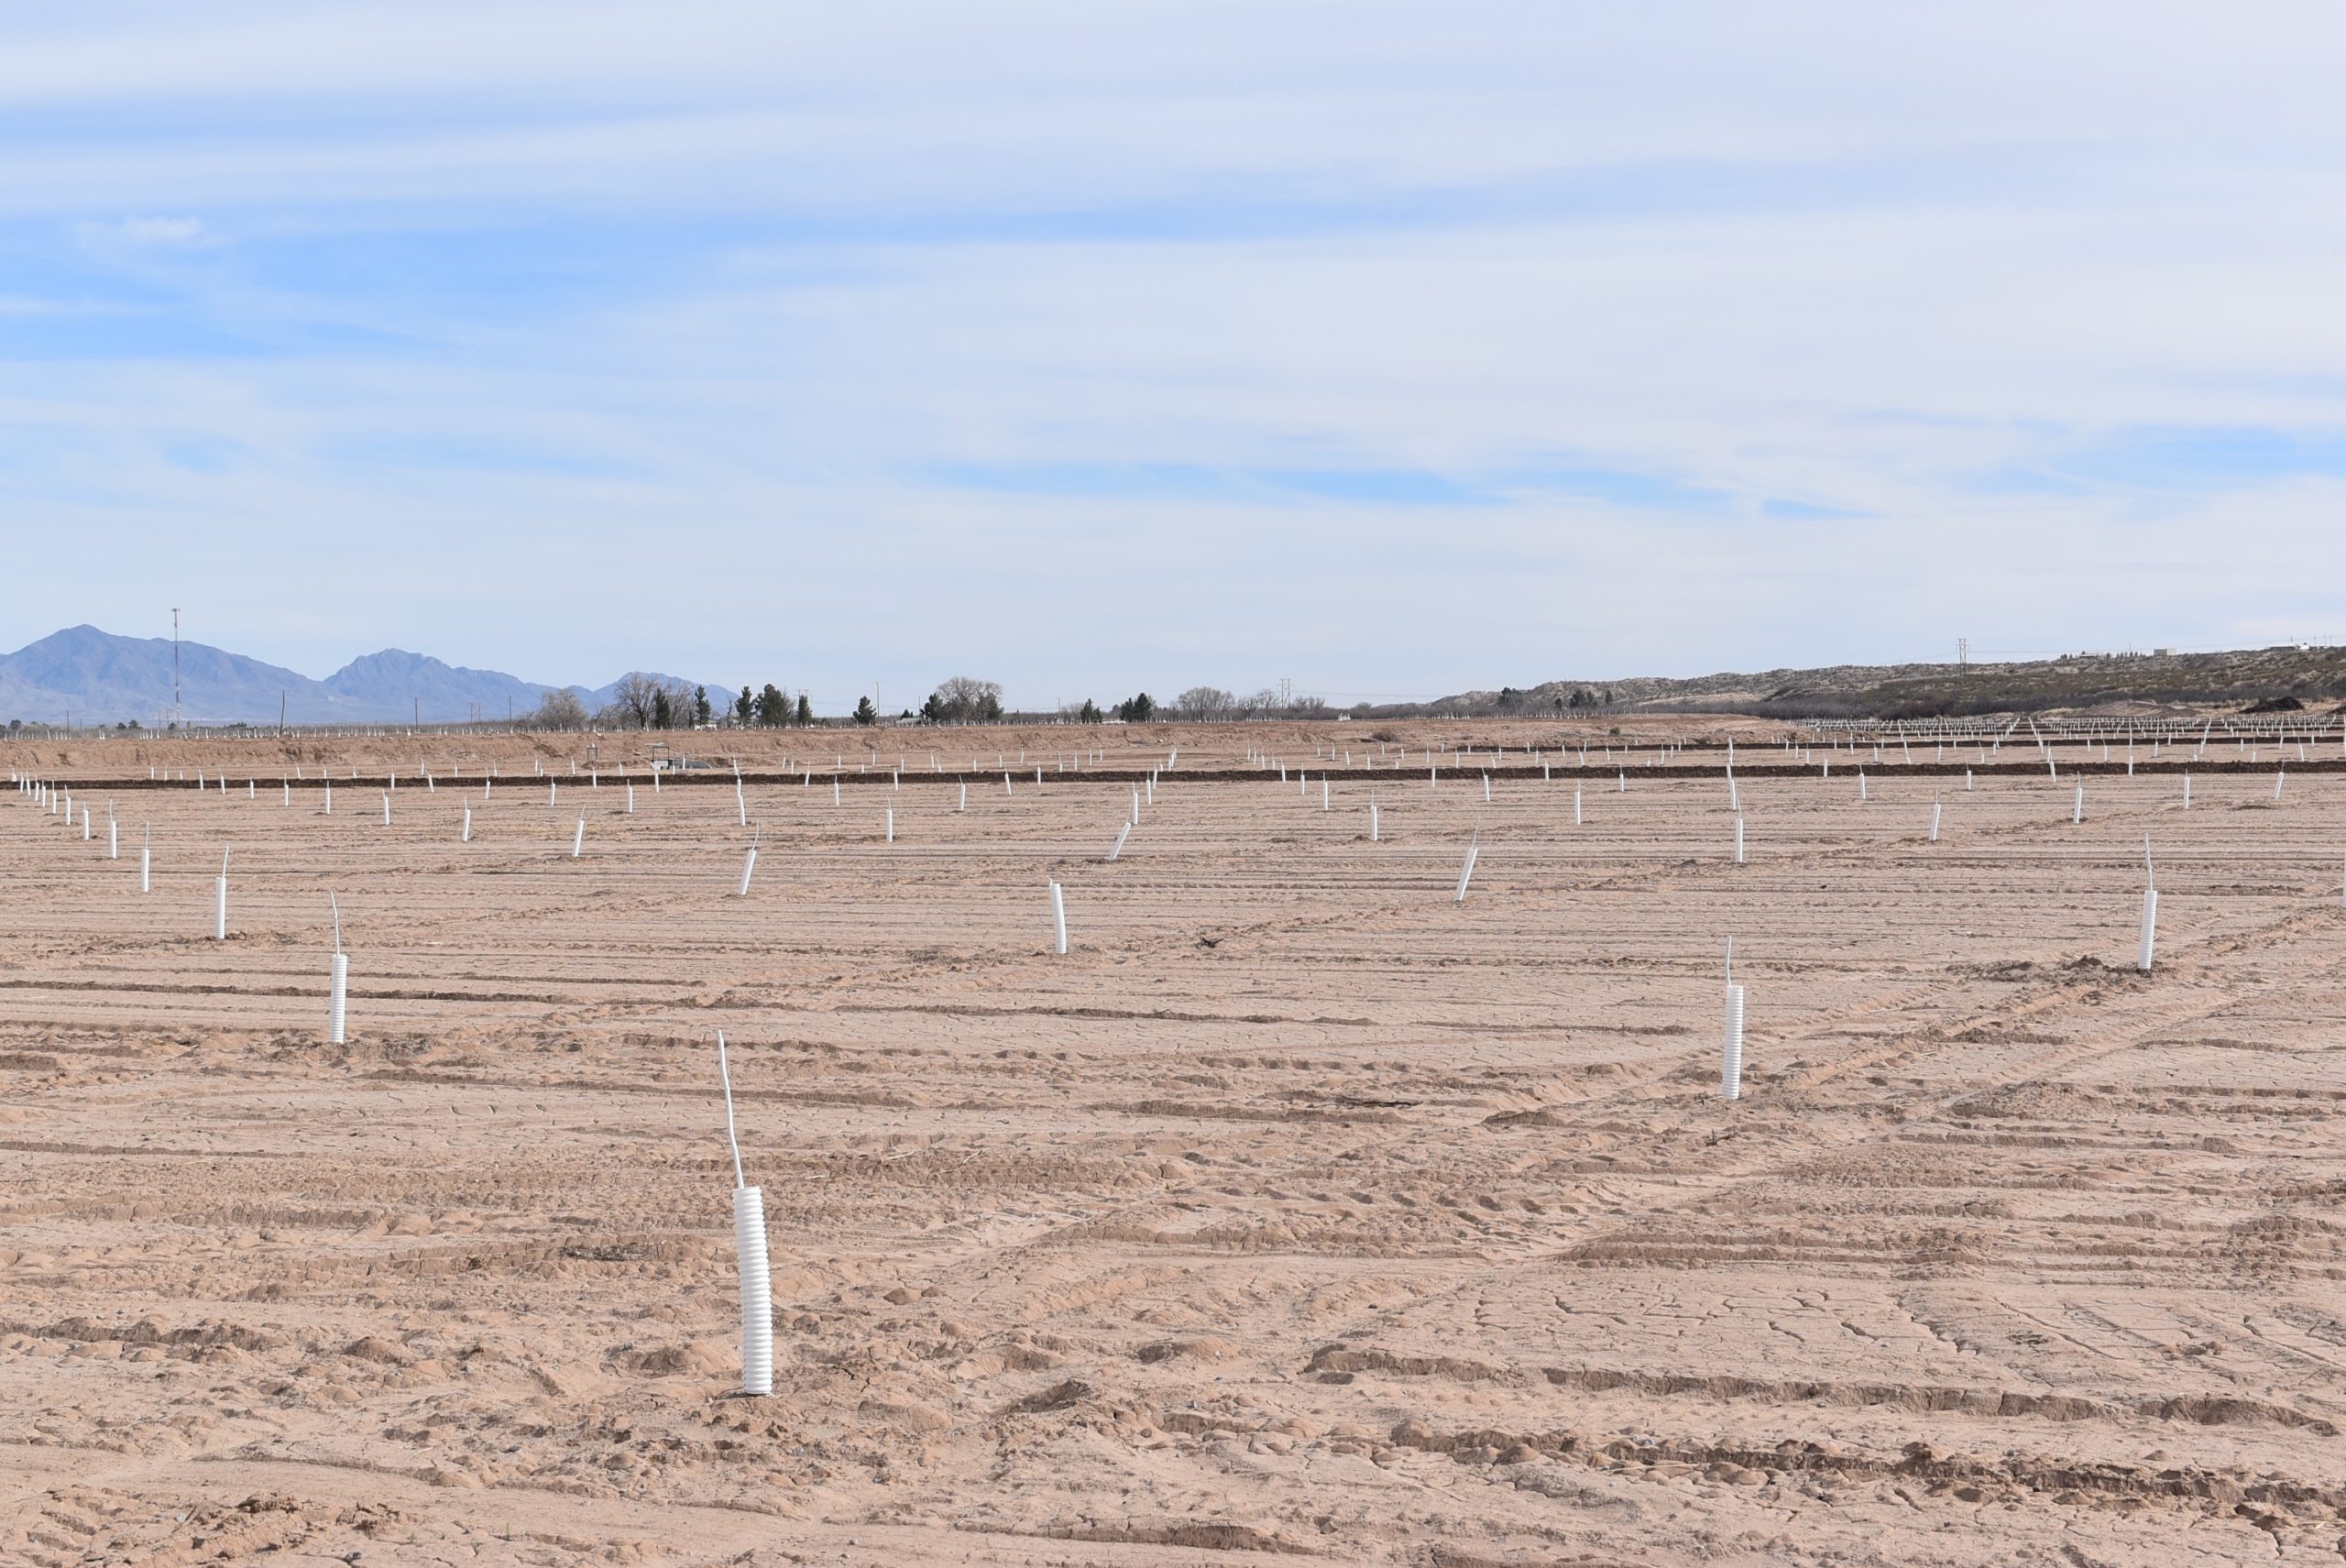 This photo shows another view of new plantings that stretch as far as one can see at Pancho Salopek Farms in La Mesa, New Mexico. (Photo by Catherine Clark)